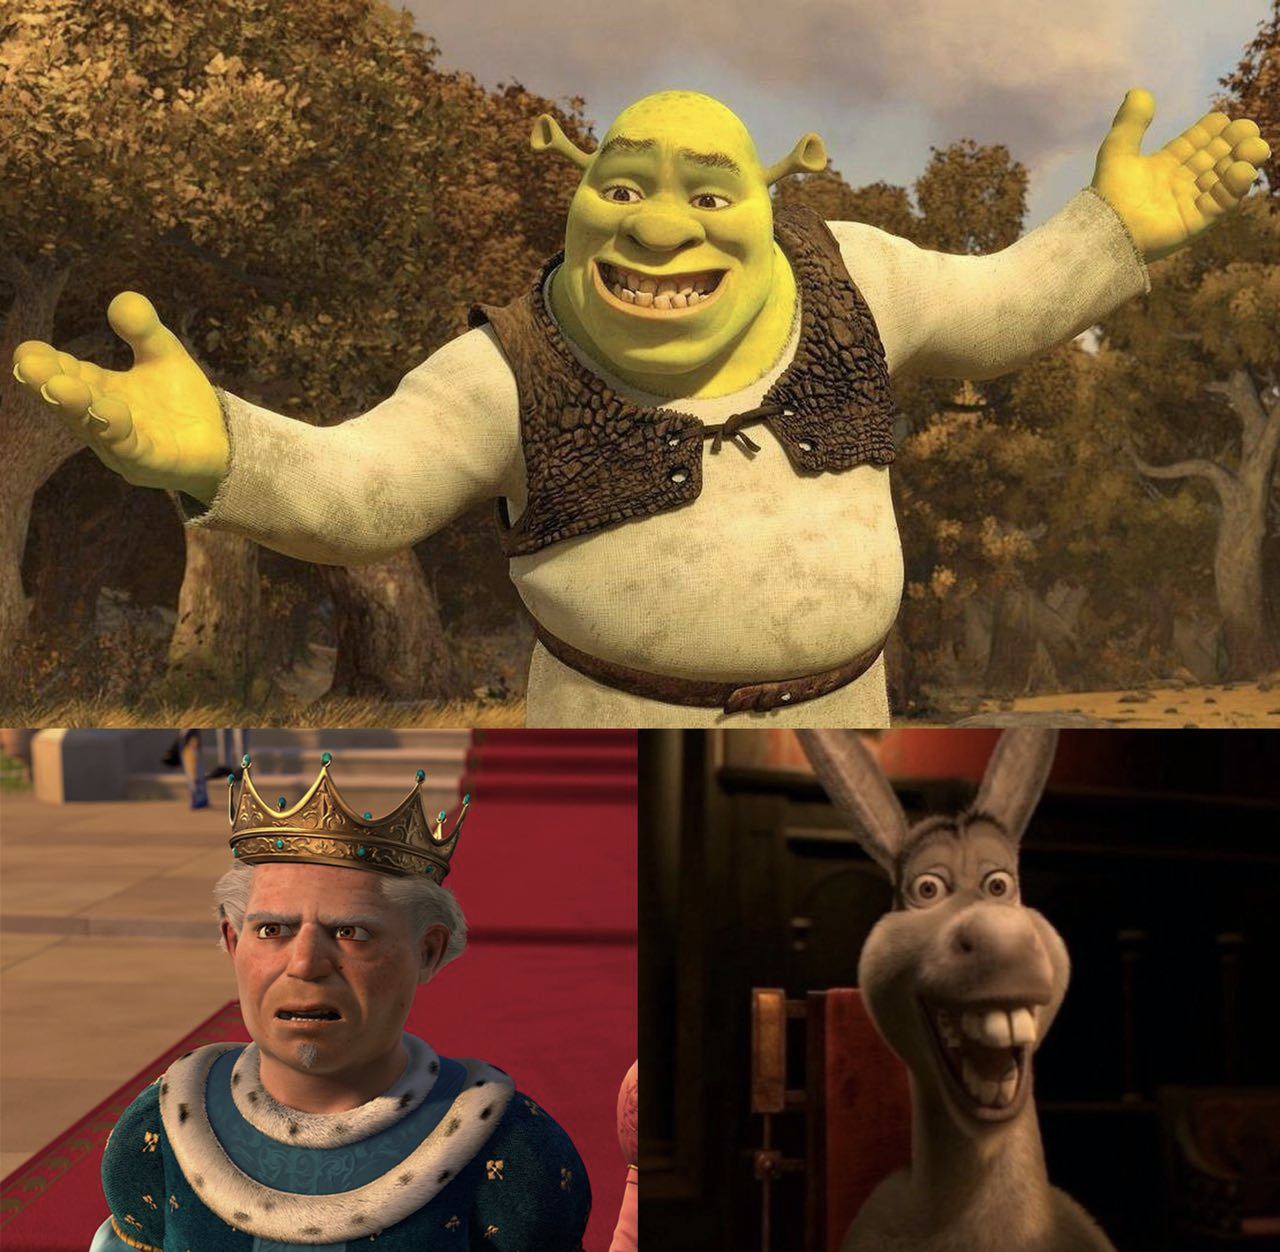 No "Shrek, King, And Donkey" memes have been featured yet. 